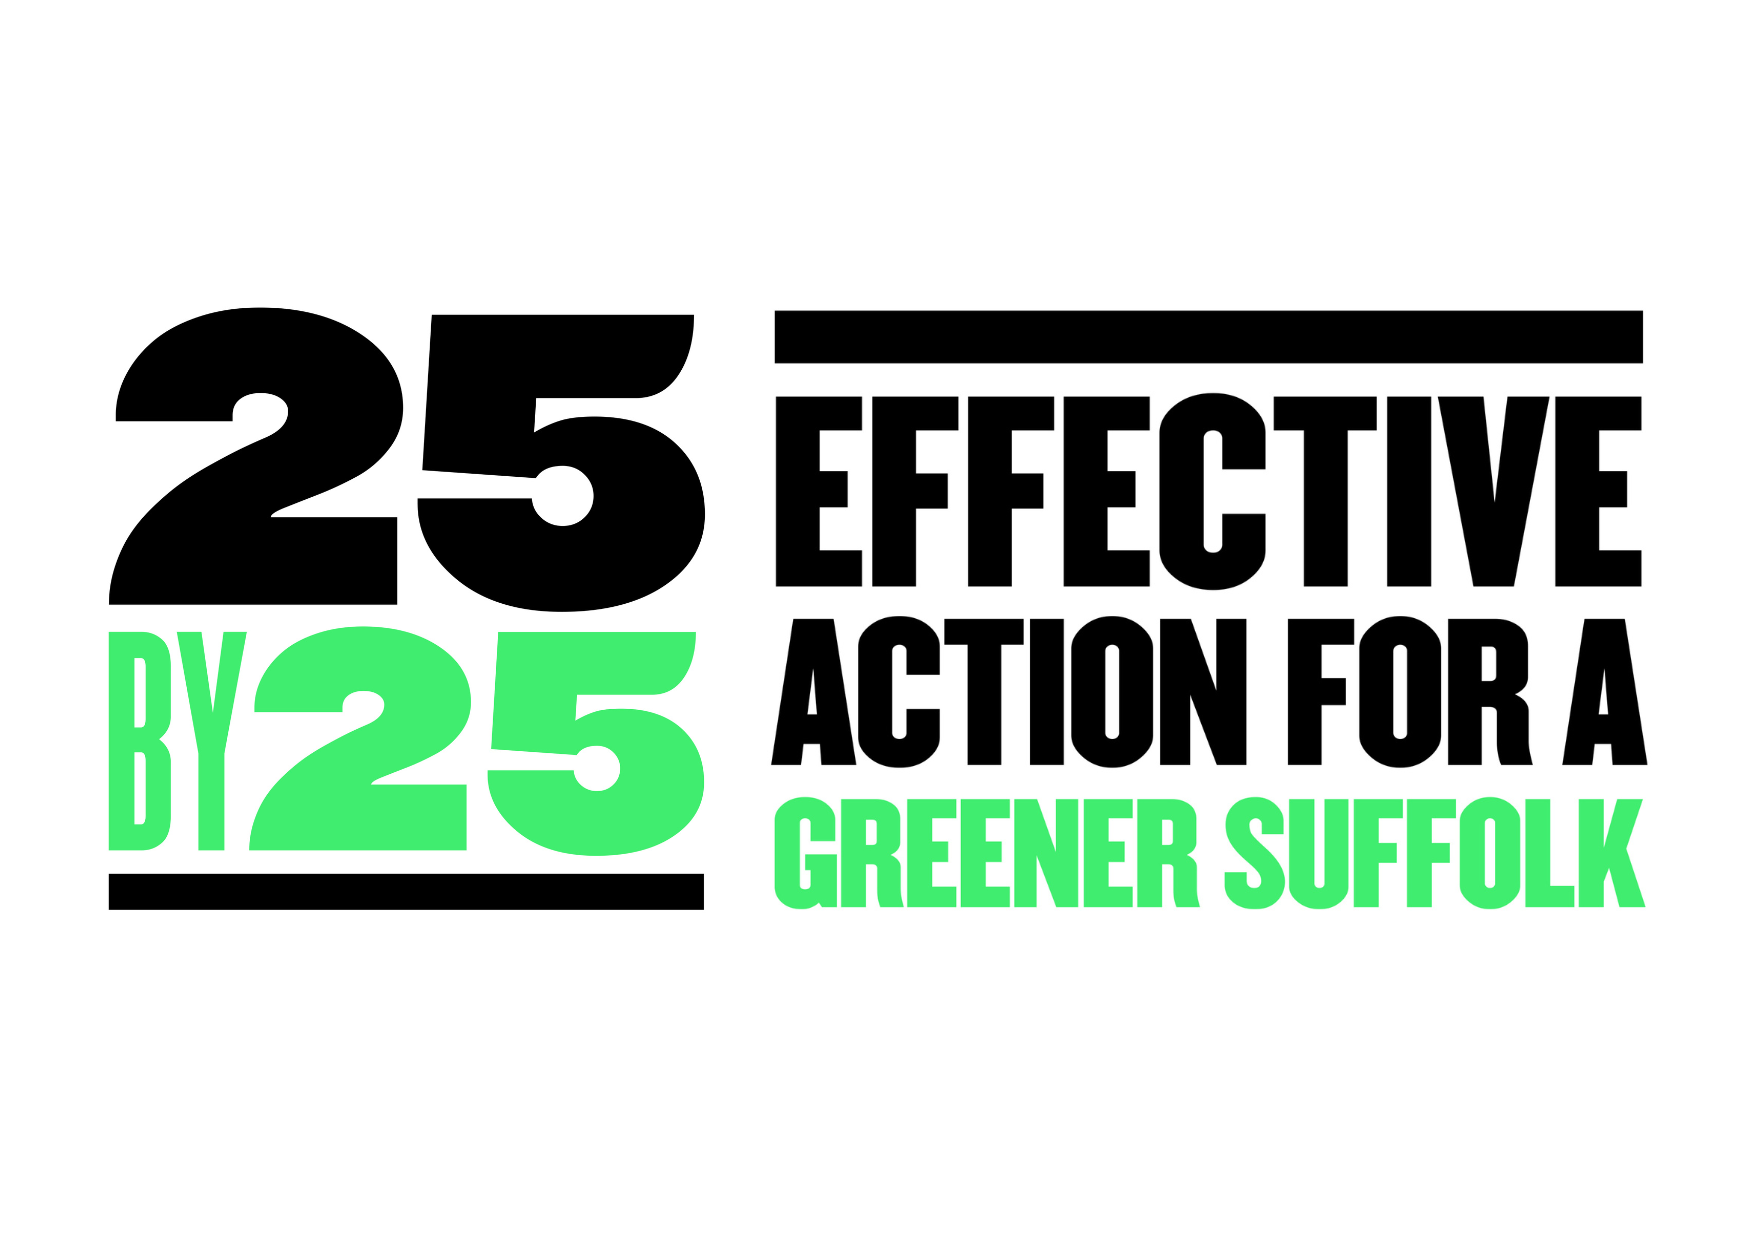 25 by 25 logo in black and green - effective action for a greener suffolk